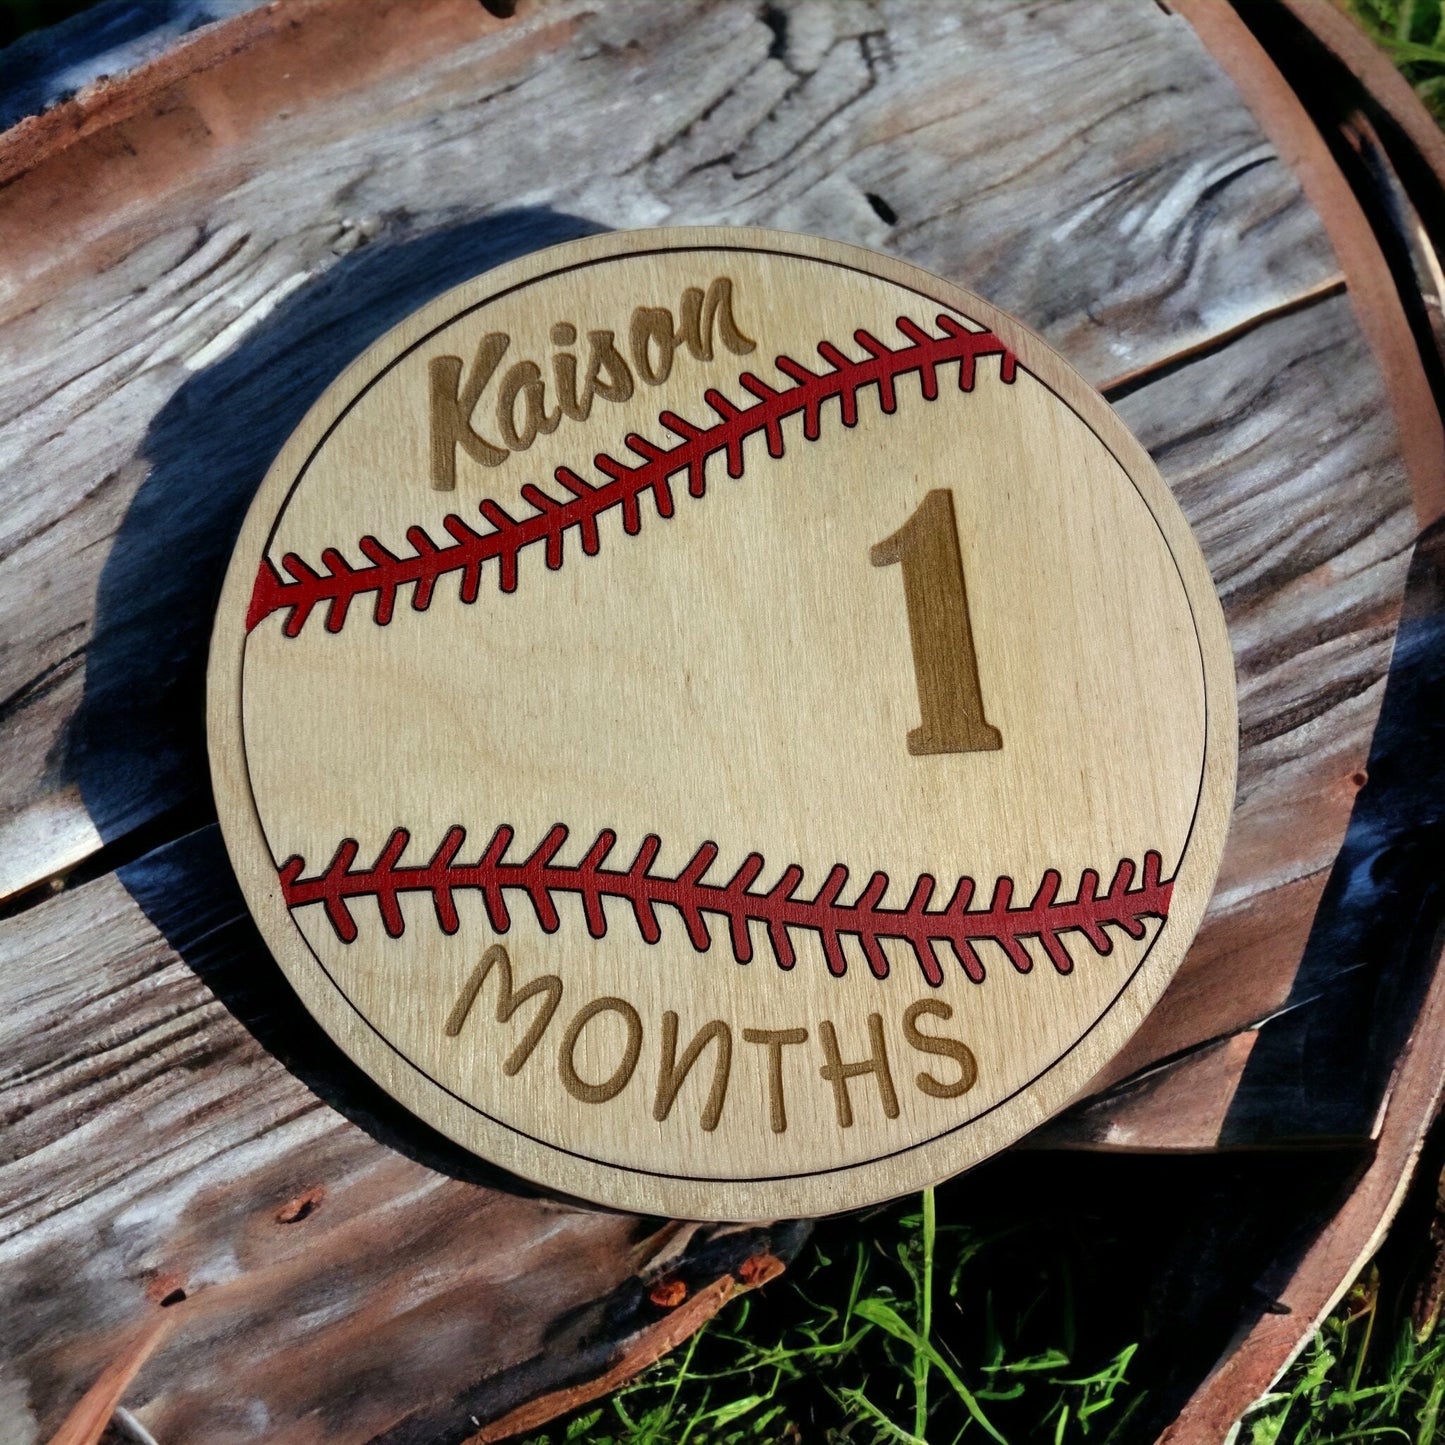 Baby Baseball Milestone Marker | Capture Your Baby's Growth | Baby Shower | Baby Gift | Interchangeable Personalized